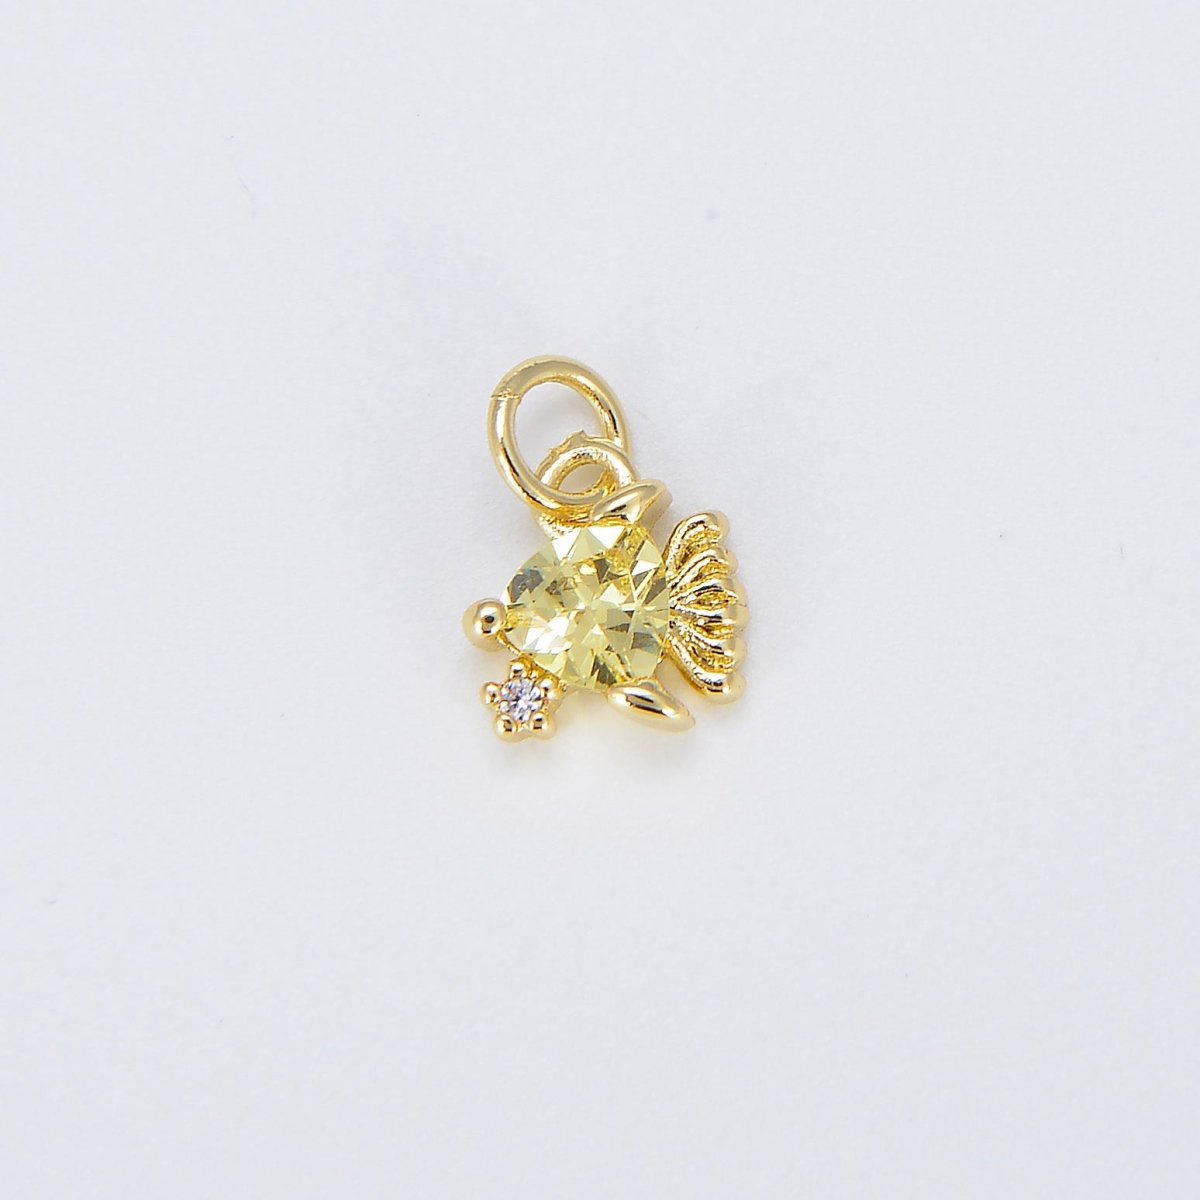 Tiny Gold Fish Charm Dainty Fish Pendant 14kt Gold Filled Charm Animal Charm Cubic Blue Under the sea Inspired E-874 - DLUXCA